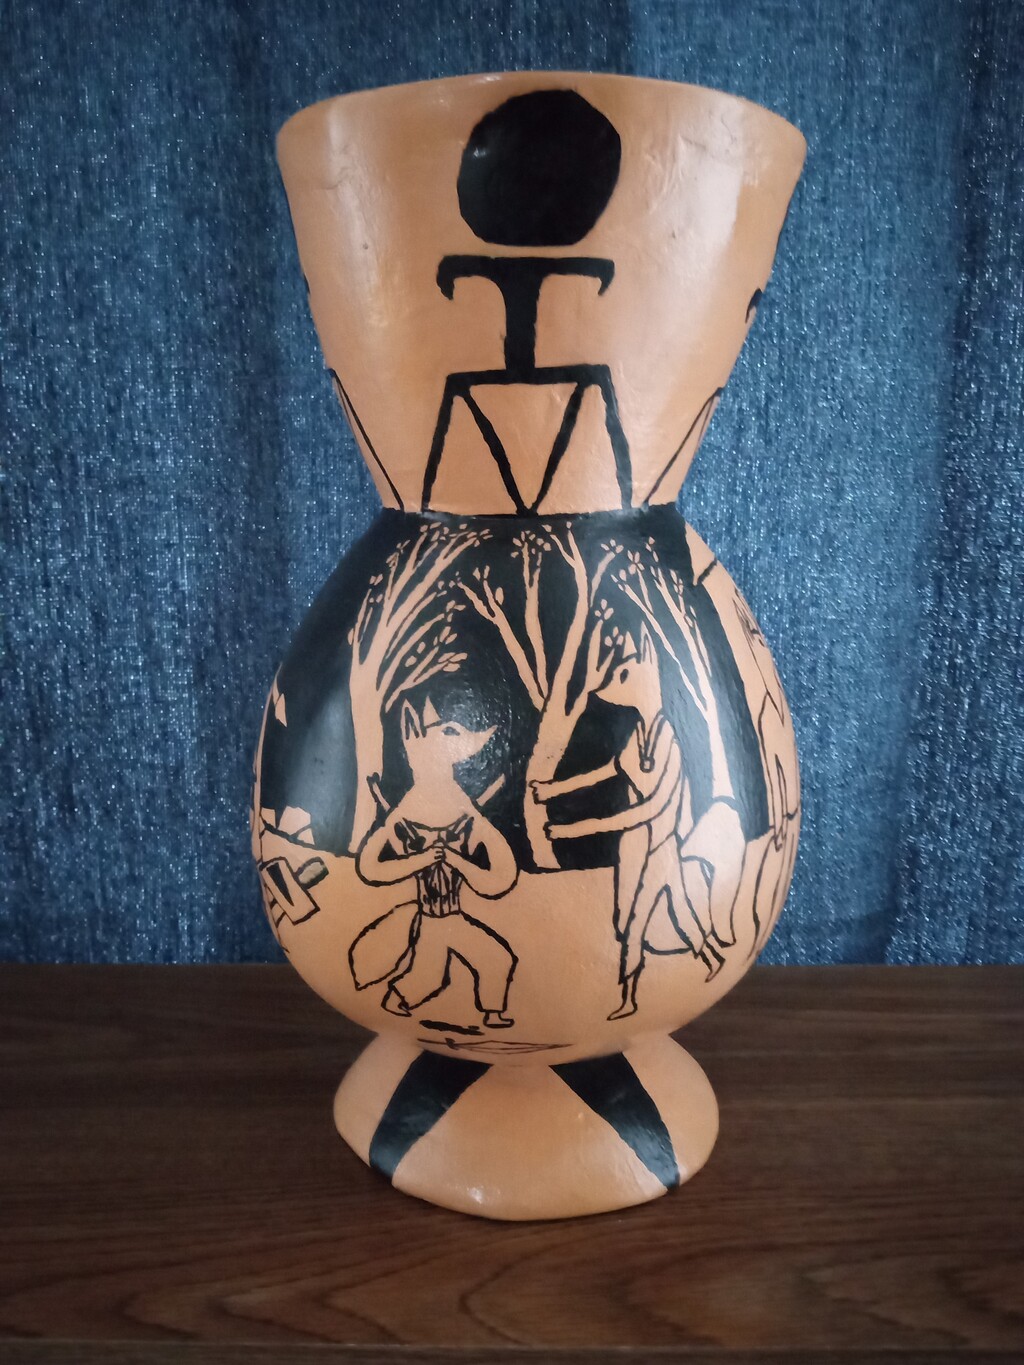 Vase From High School - View 1 of 4